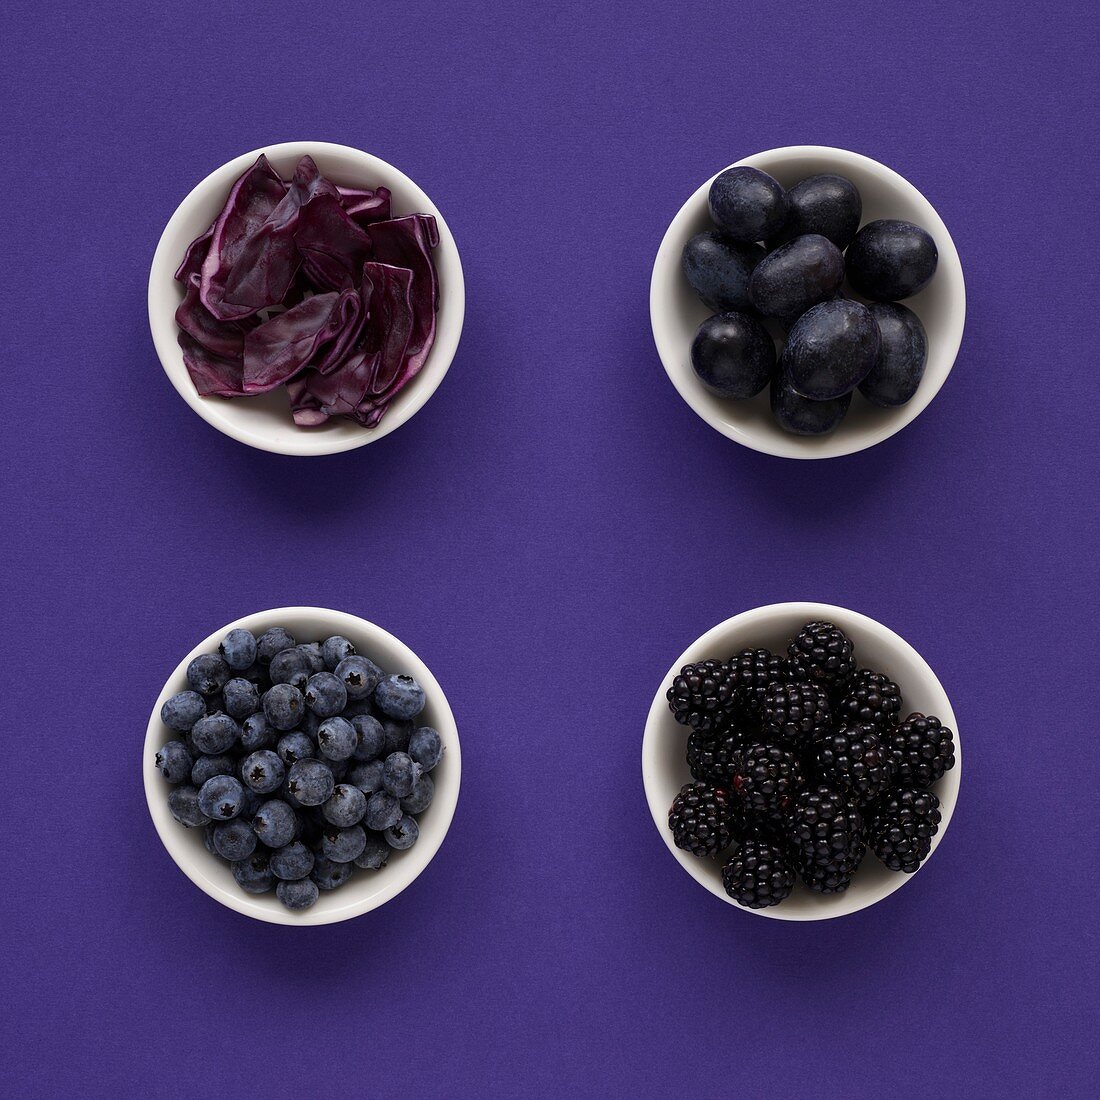 Purple produce in dishes